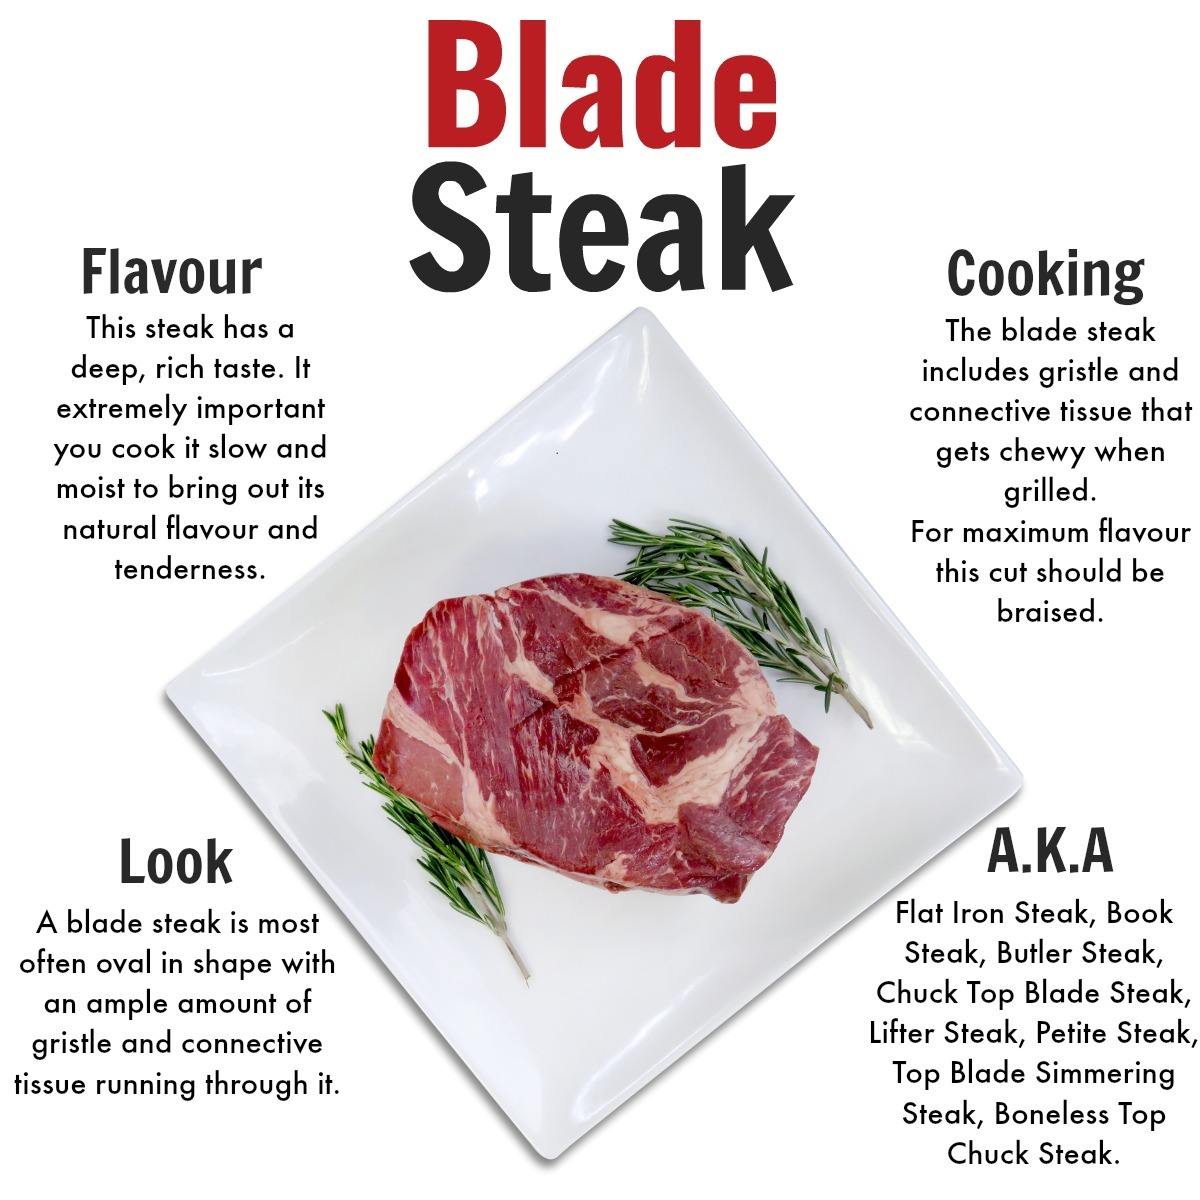 Affordable grass-fed beef delivery near me, steaks, ground beef and more - Nutrafams - Blade Steak 2